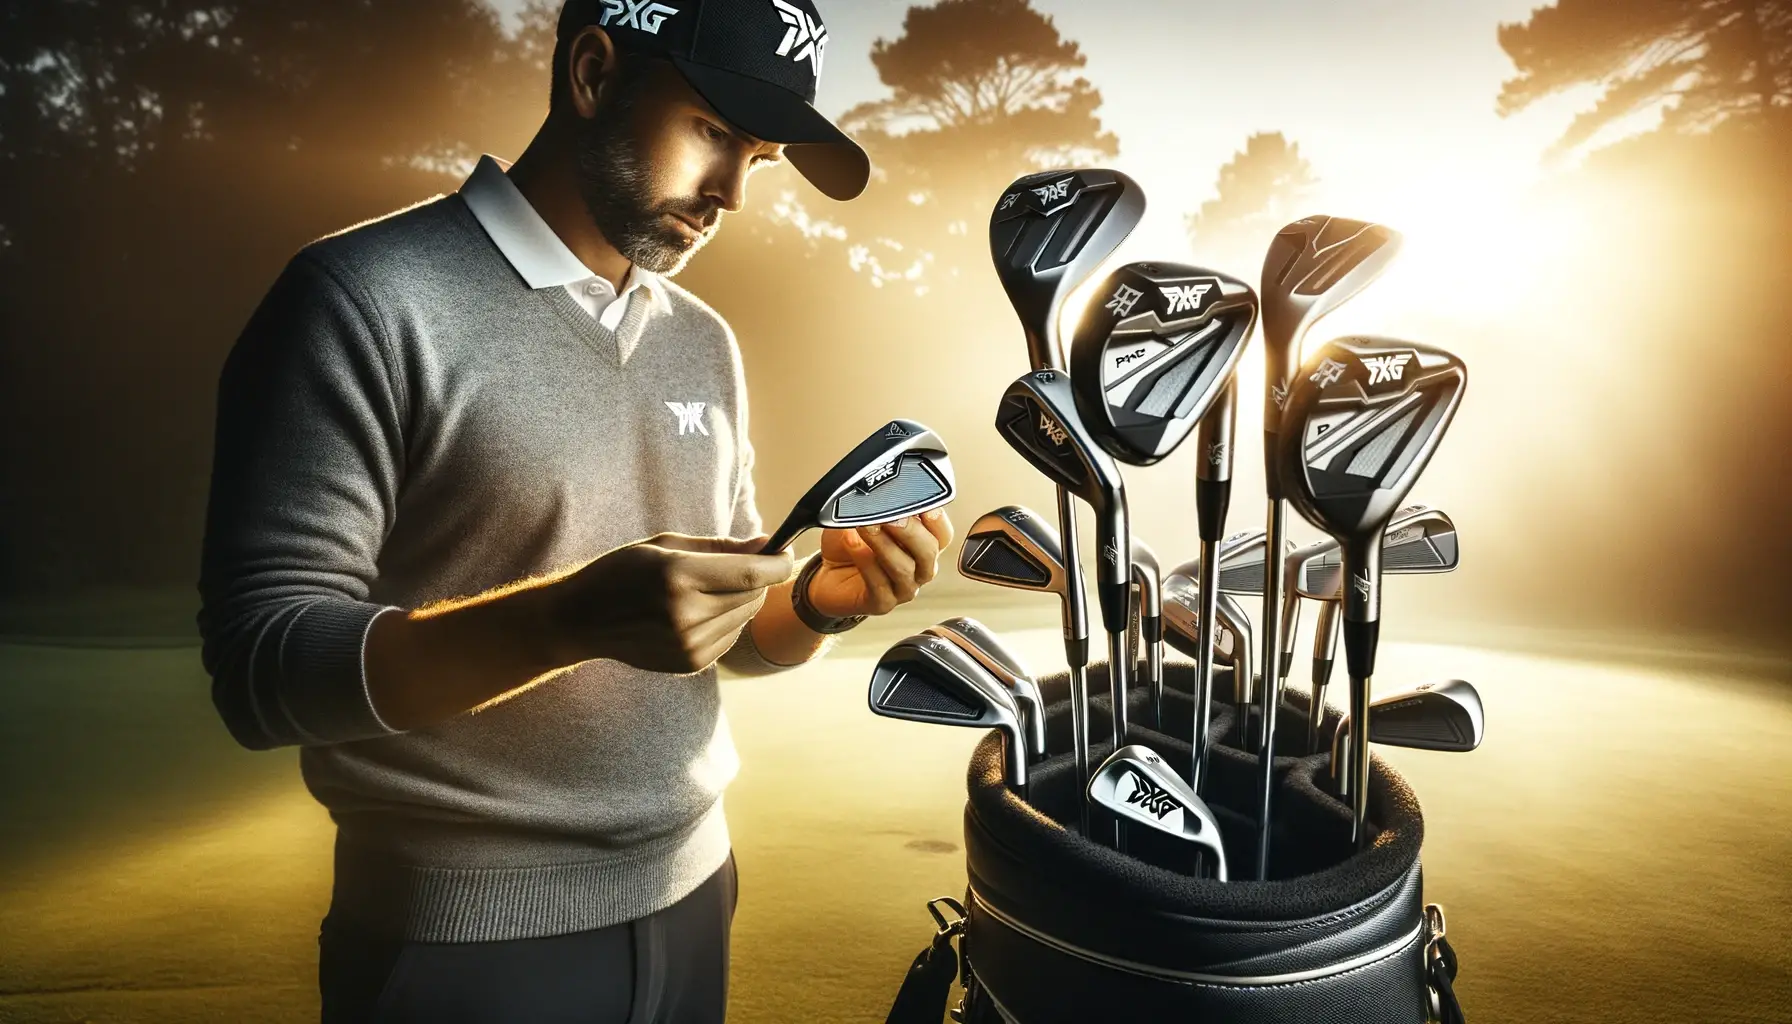 Are PXG Irons Worth the Money?